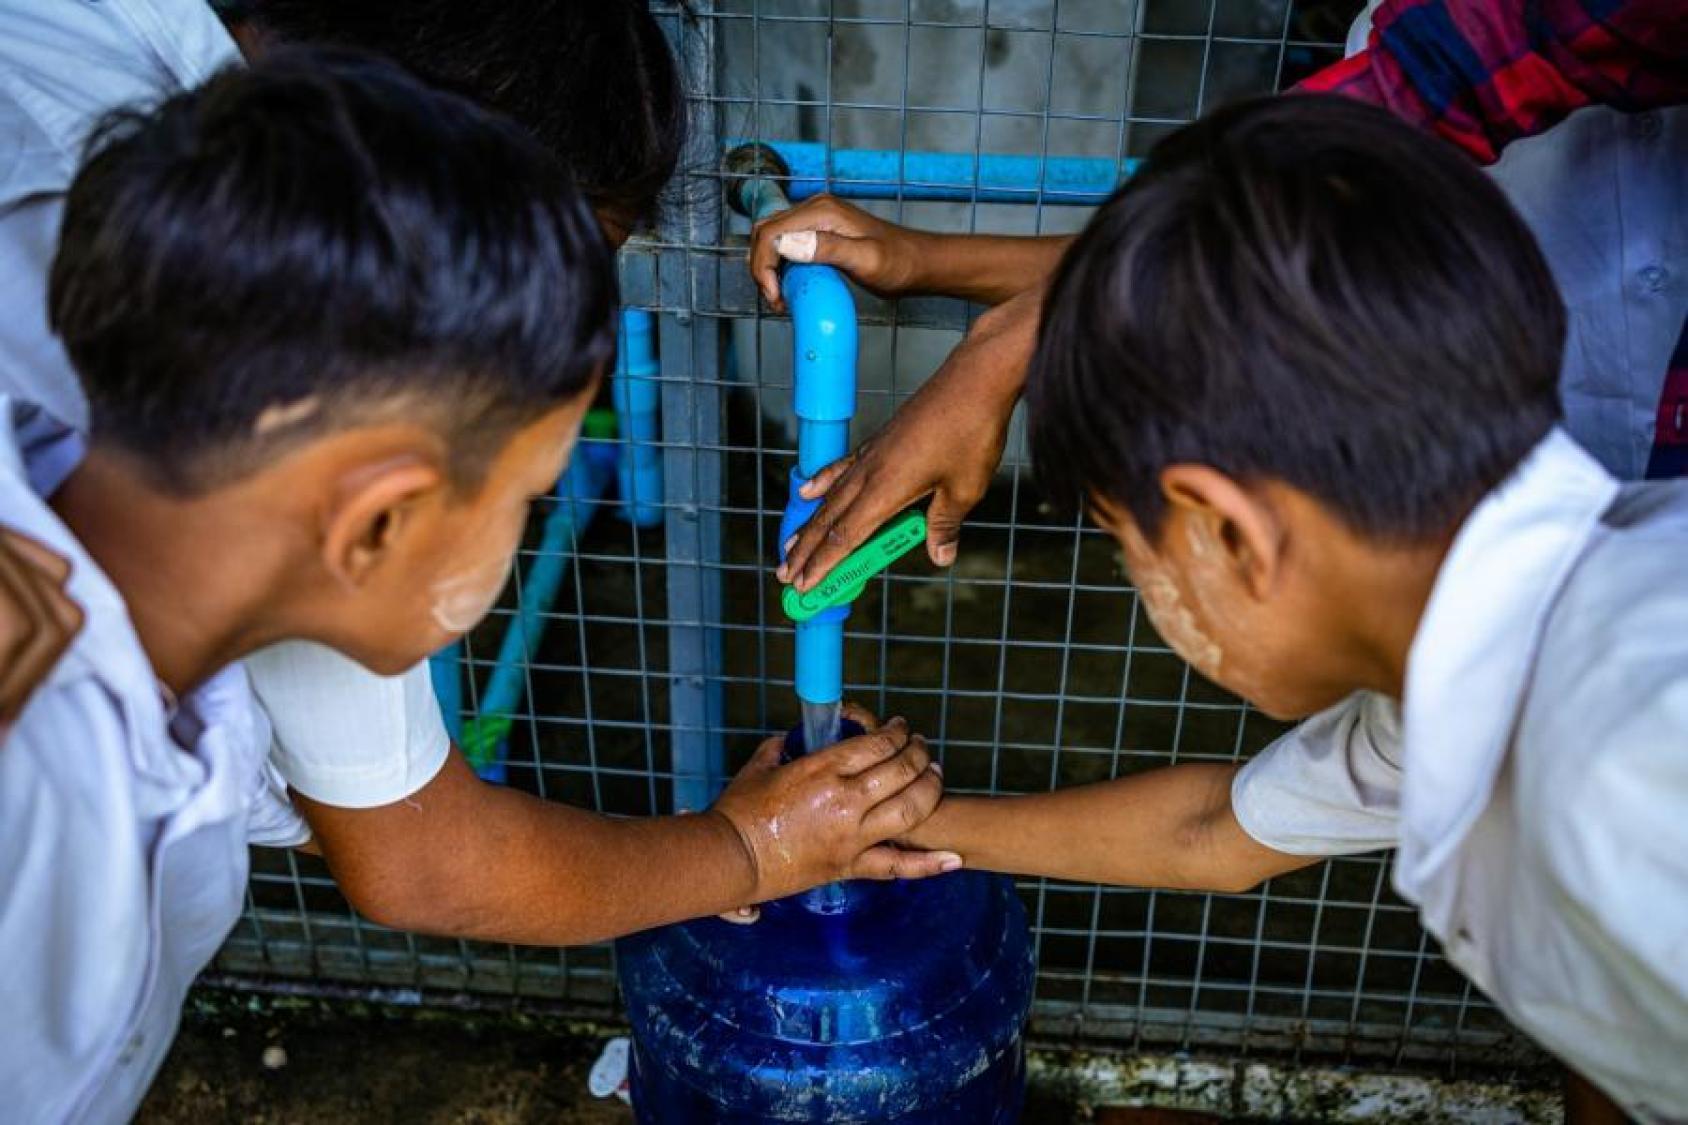 Boys, wearing white polo shirts, fill a container with water from a drinking fountain.